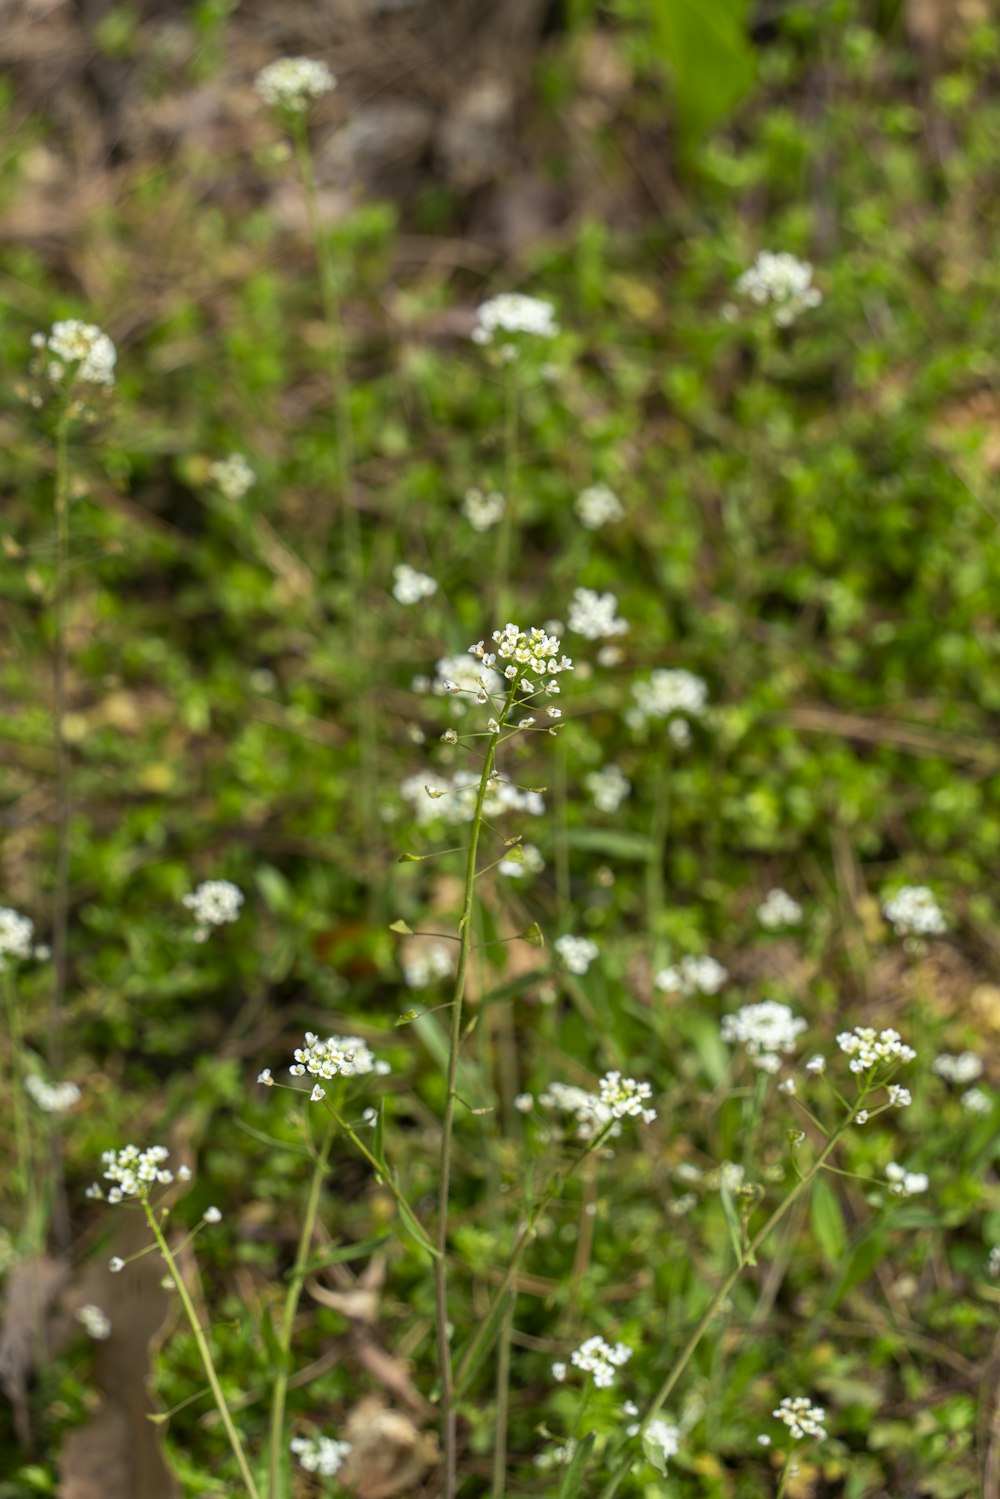 small white flowers in a field of grass